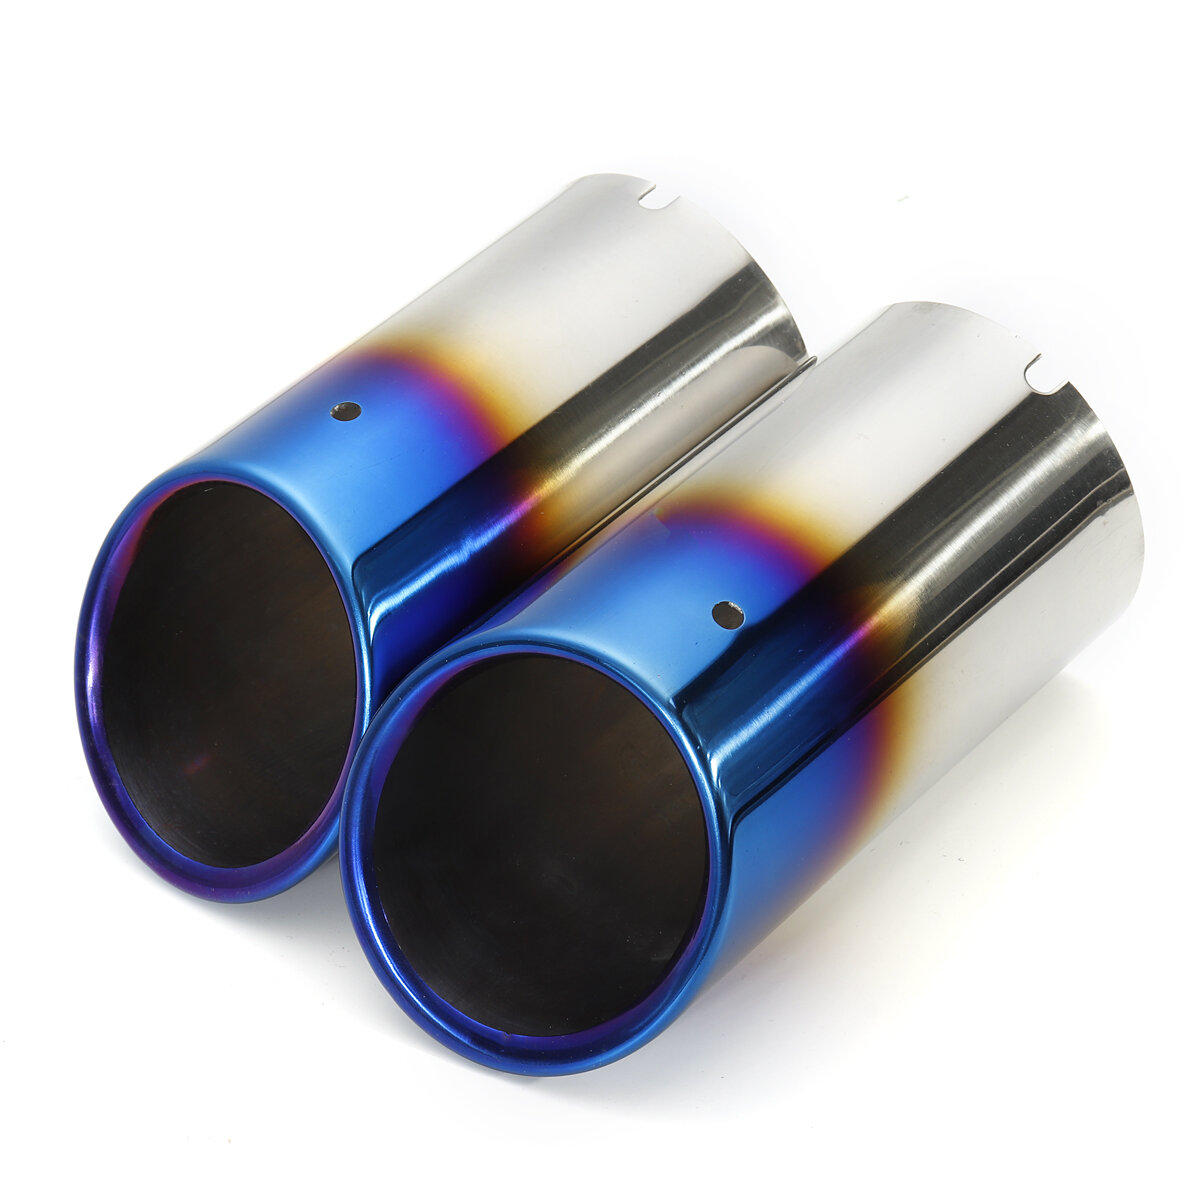 Stainless steel car exhaust muffler tail pipe tip pair for audi q5 a1